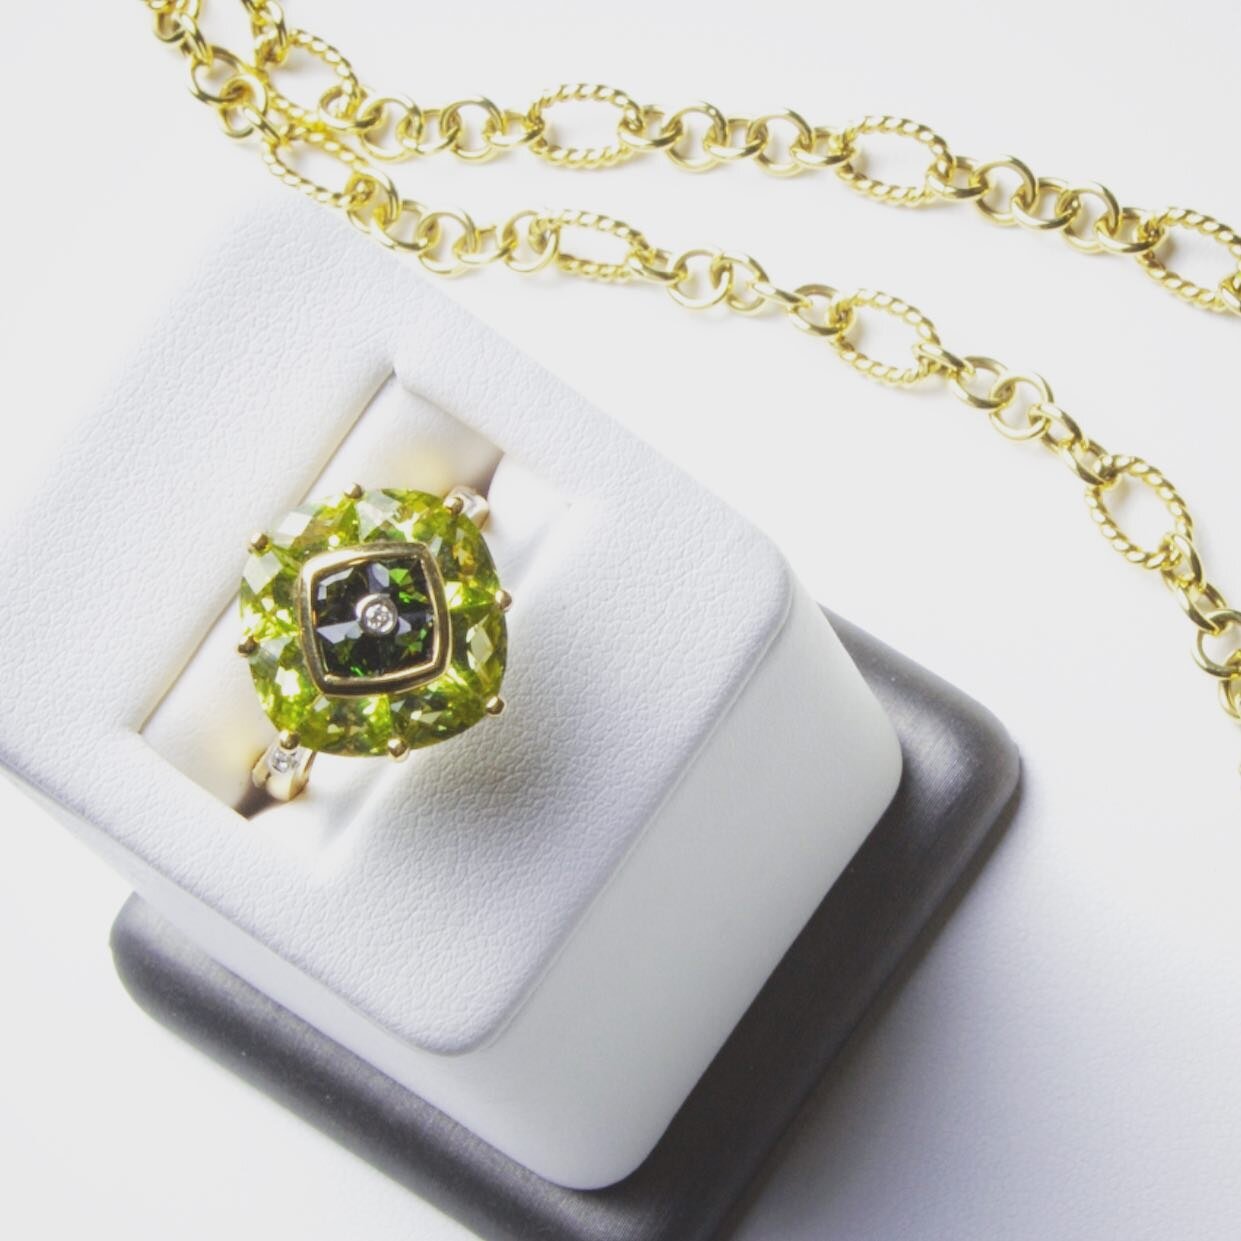 ✨P E R I D O T 🍀 ✨✨Lucky stone for August babies looks great with links of gold  #peridotjewelry #goldlinks